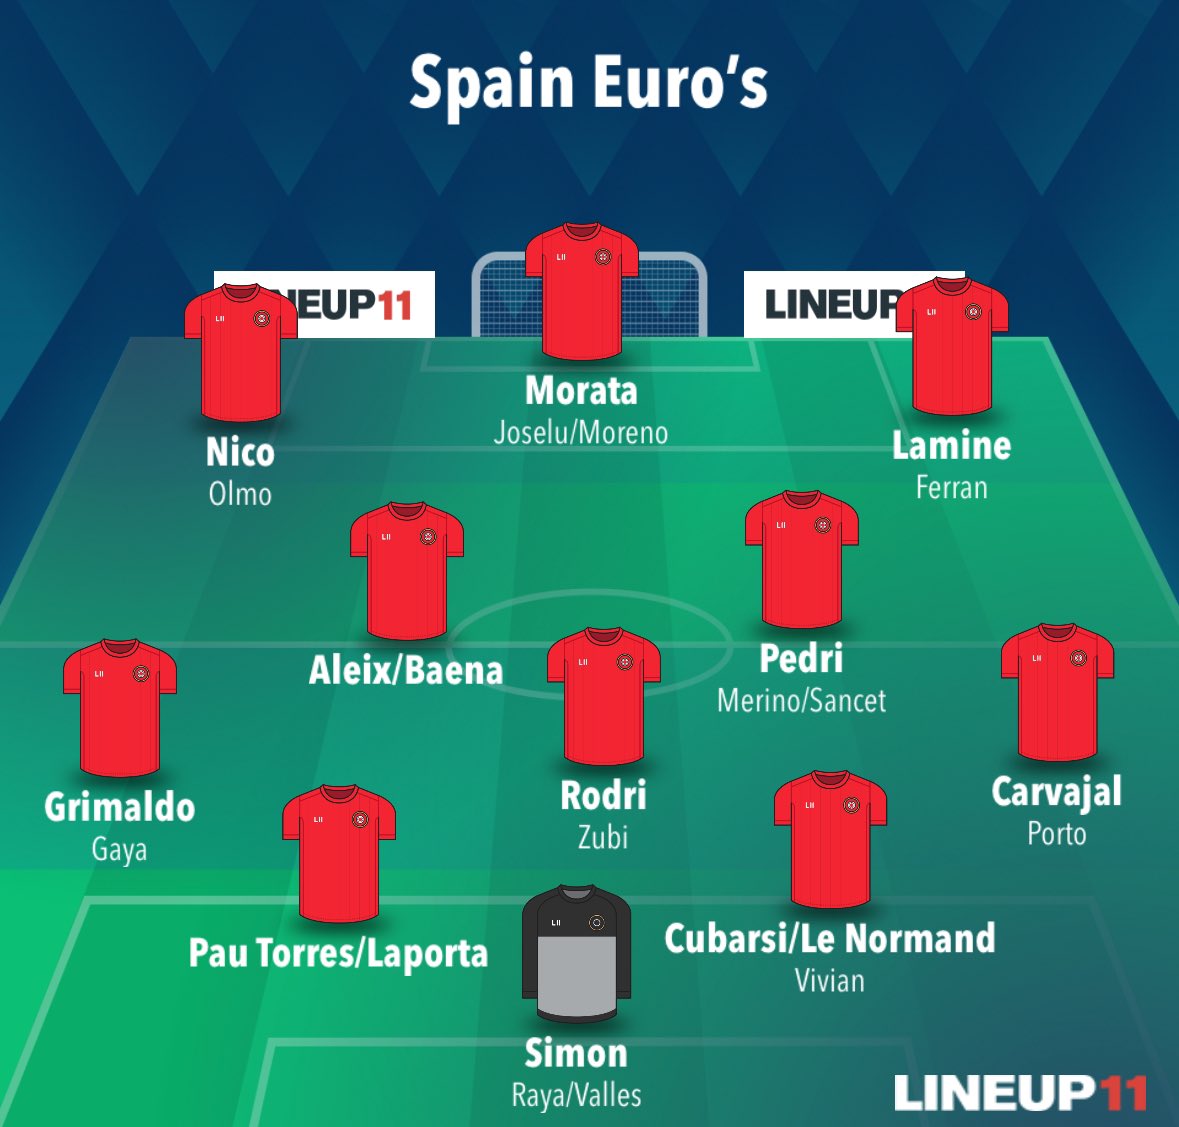 Just me, or does Spain have one of the best/most balanced squads for this year’s Euro’s? 

The lack of a natural goalscorer aside, I see very few obvious deficiencies to this squad. Even then, Morata’s NT record is *very* good. 

De La Fuente better not mess this up, man.